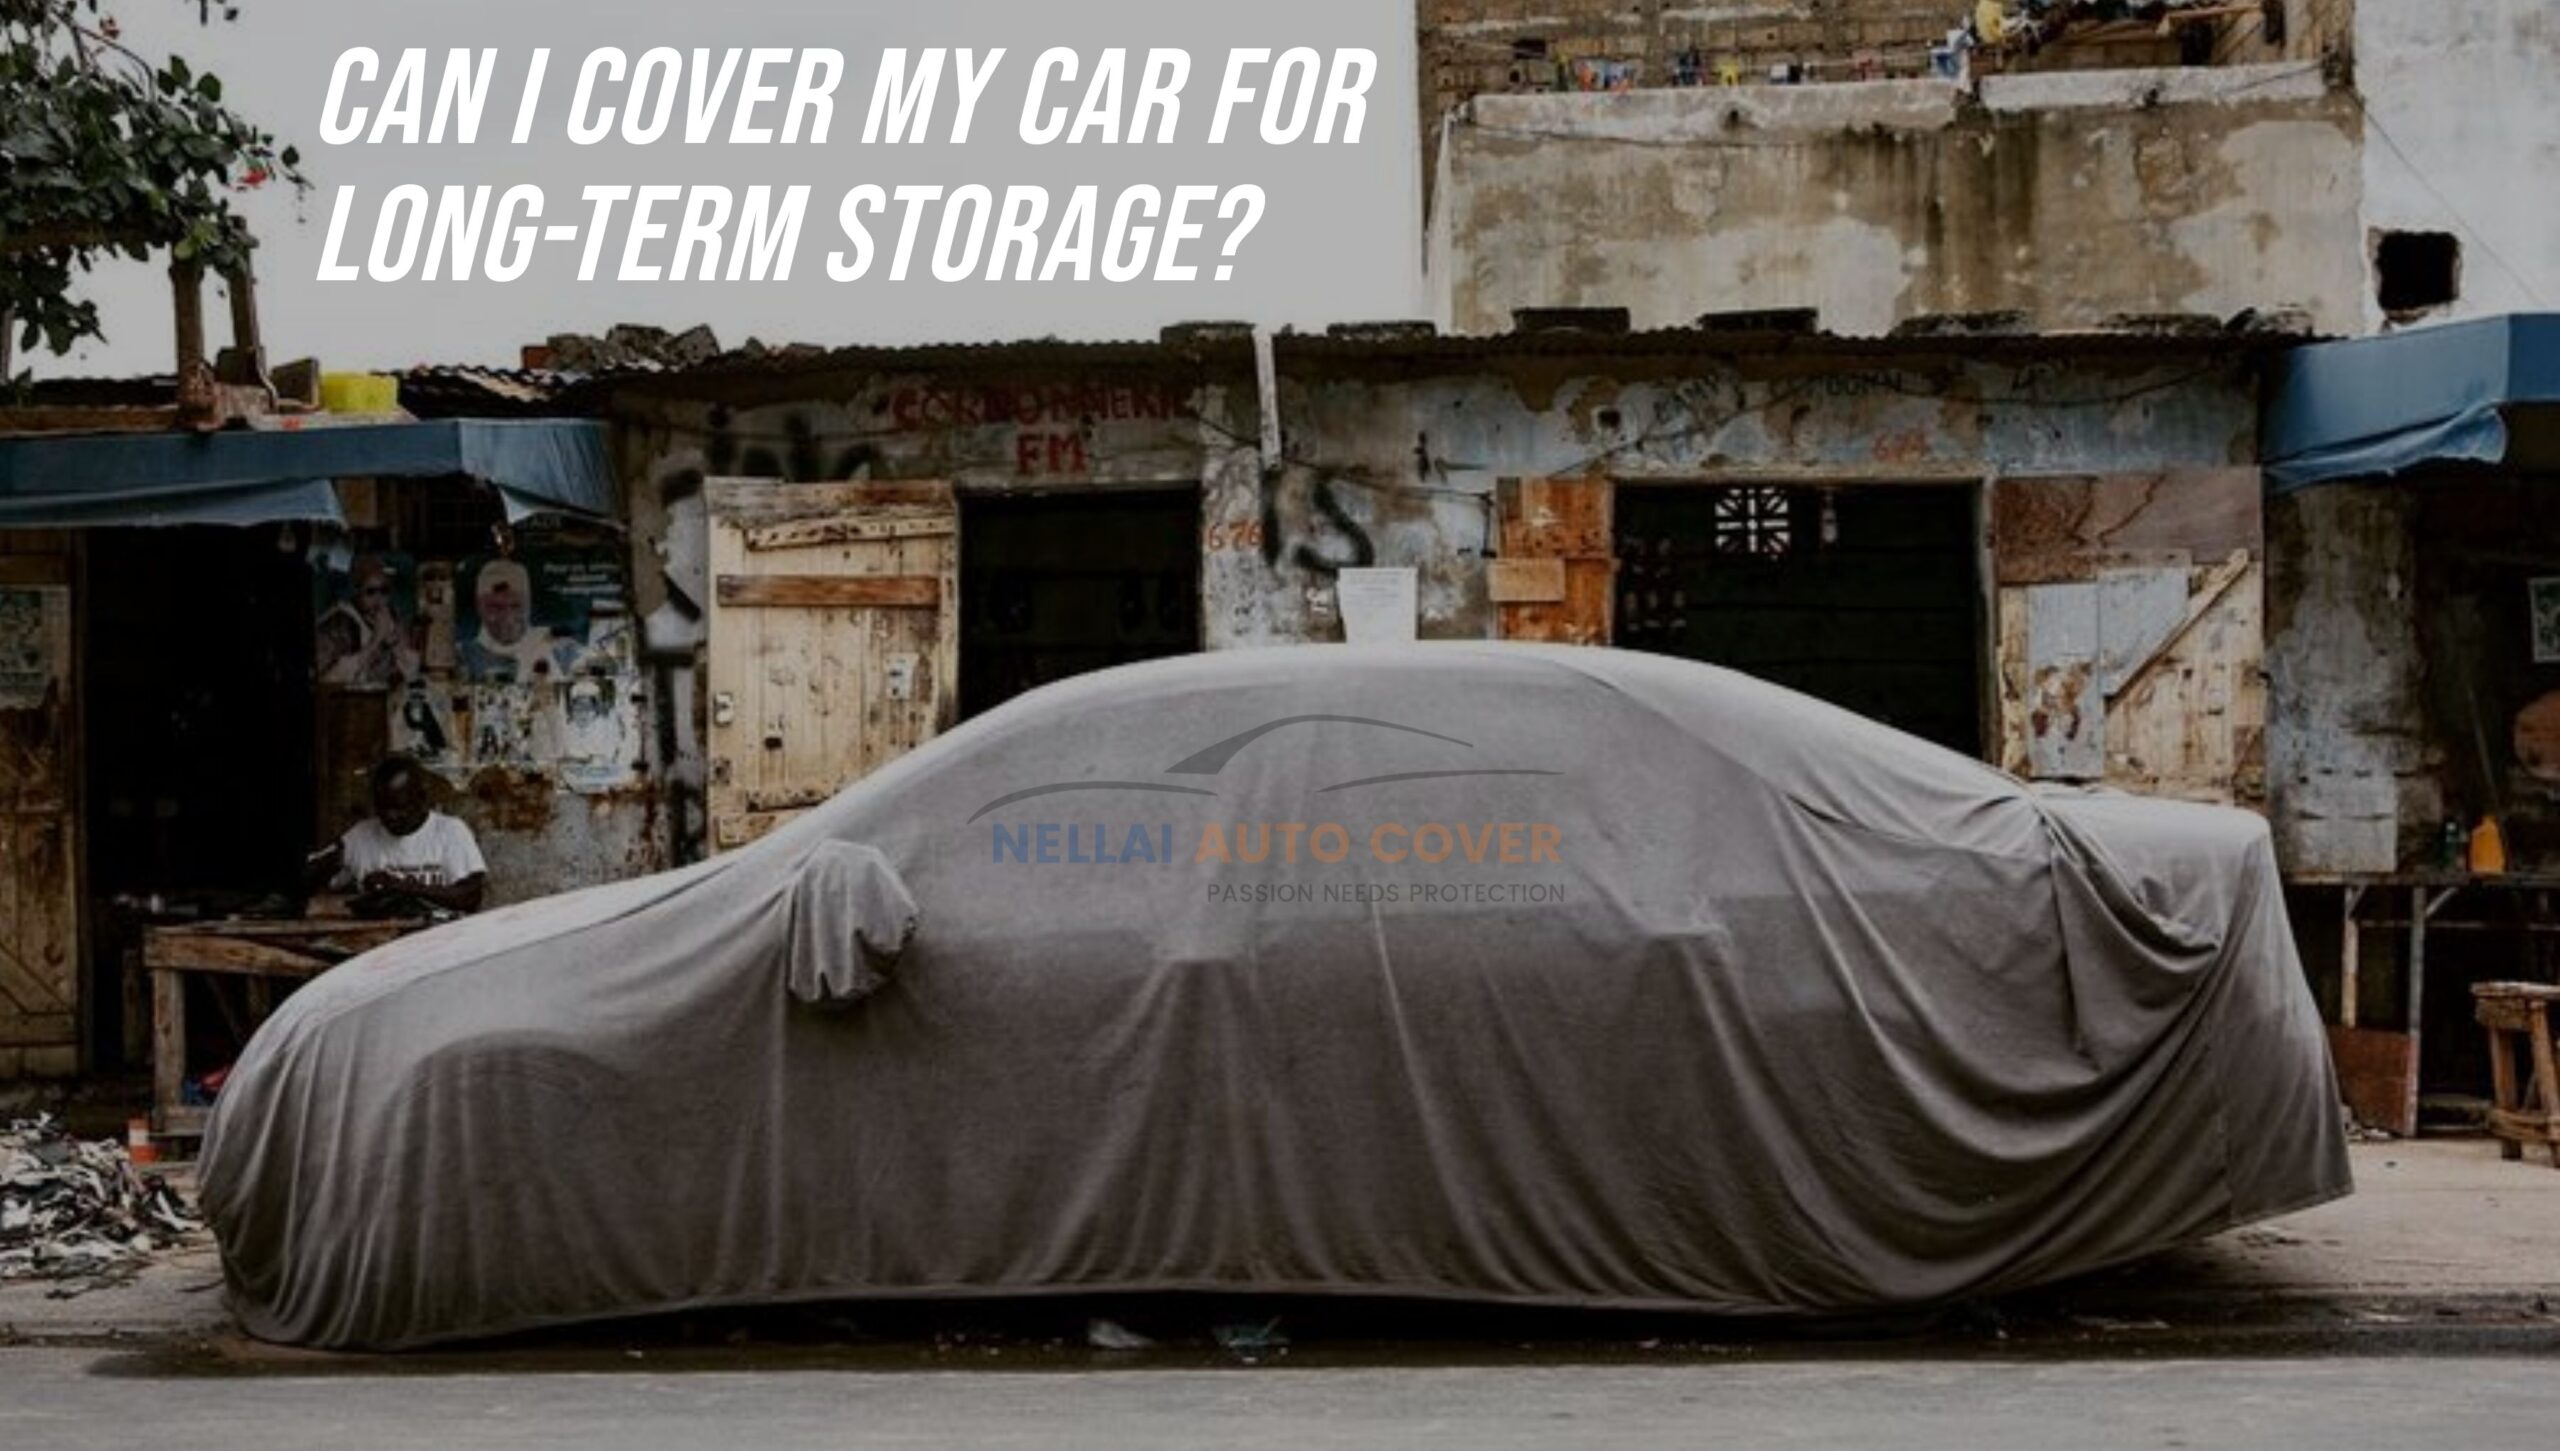 Can I cover my car for long-term storage?